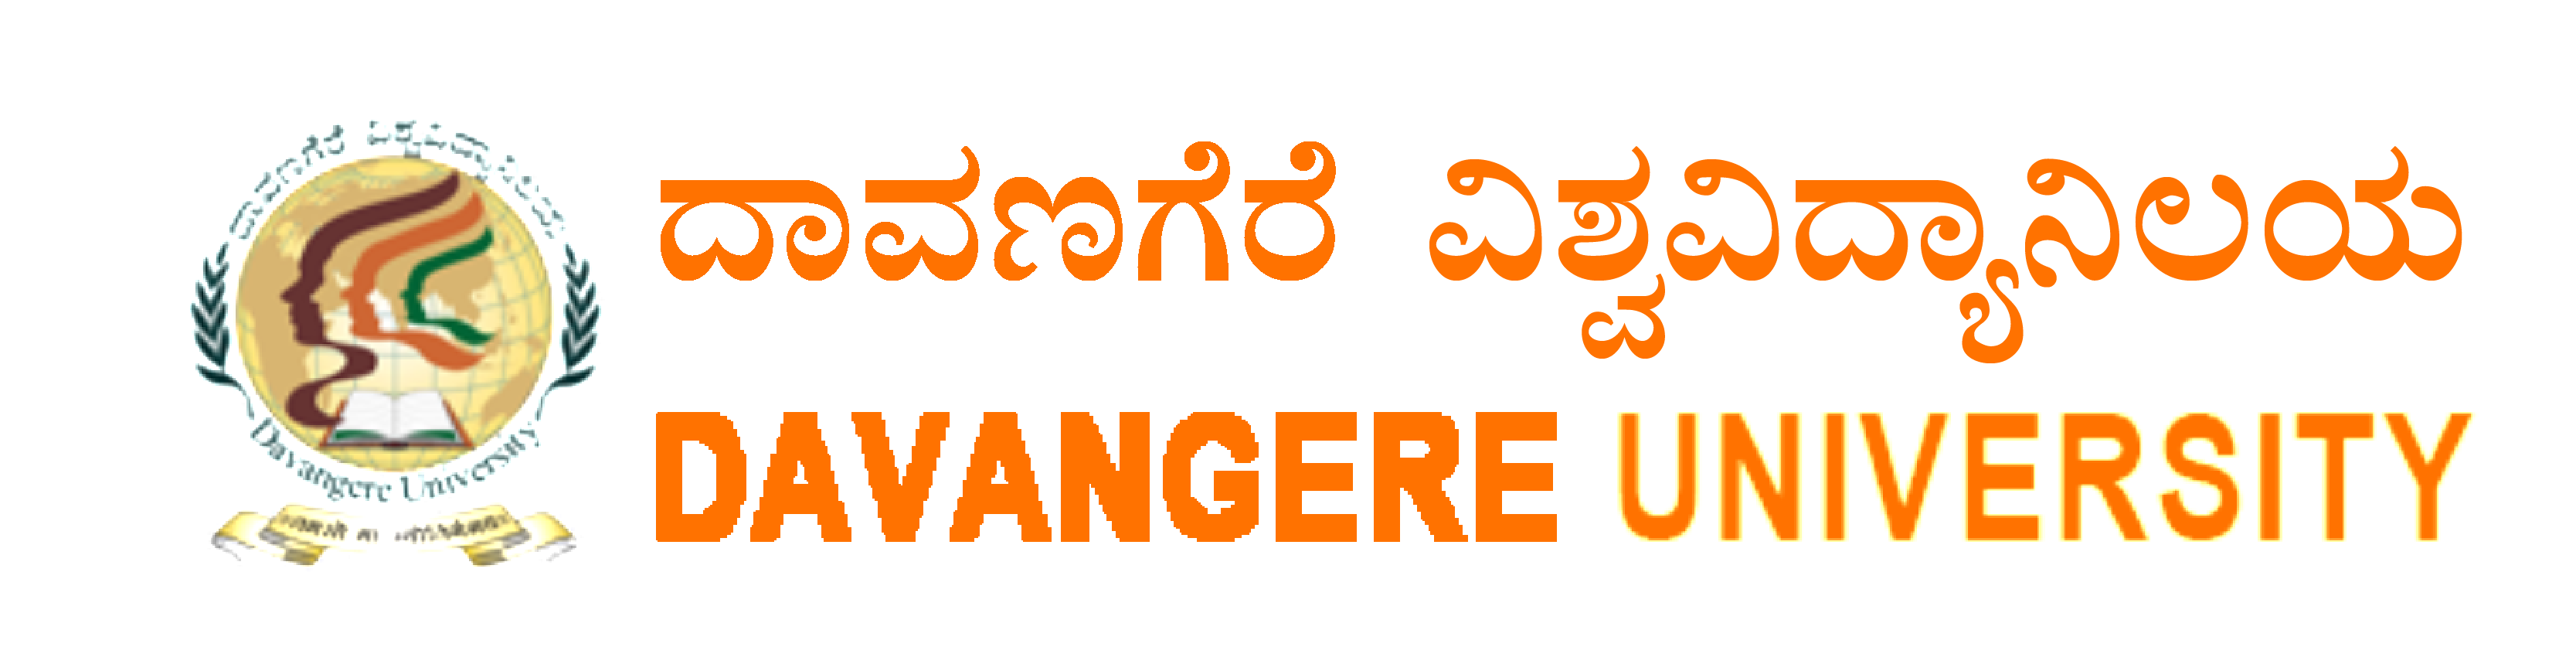 Davangere University Time table 2021 - Check Exam Dates, Latest Notifications 1